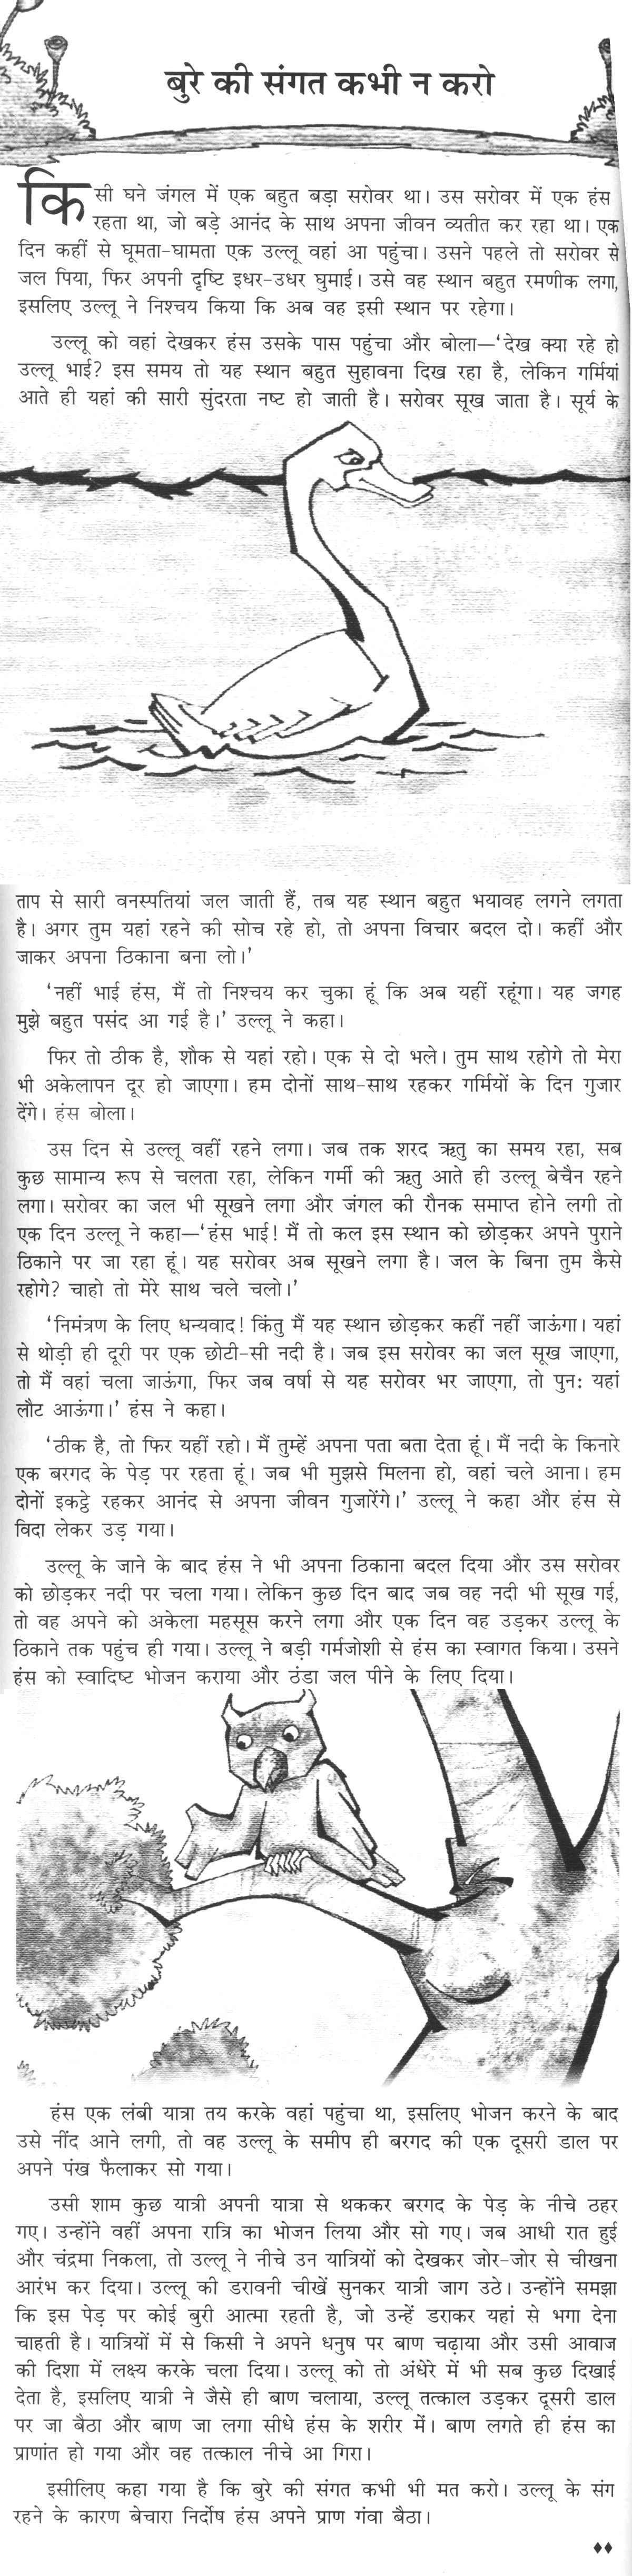 essay on real friendship in hindi